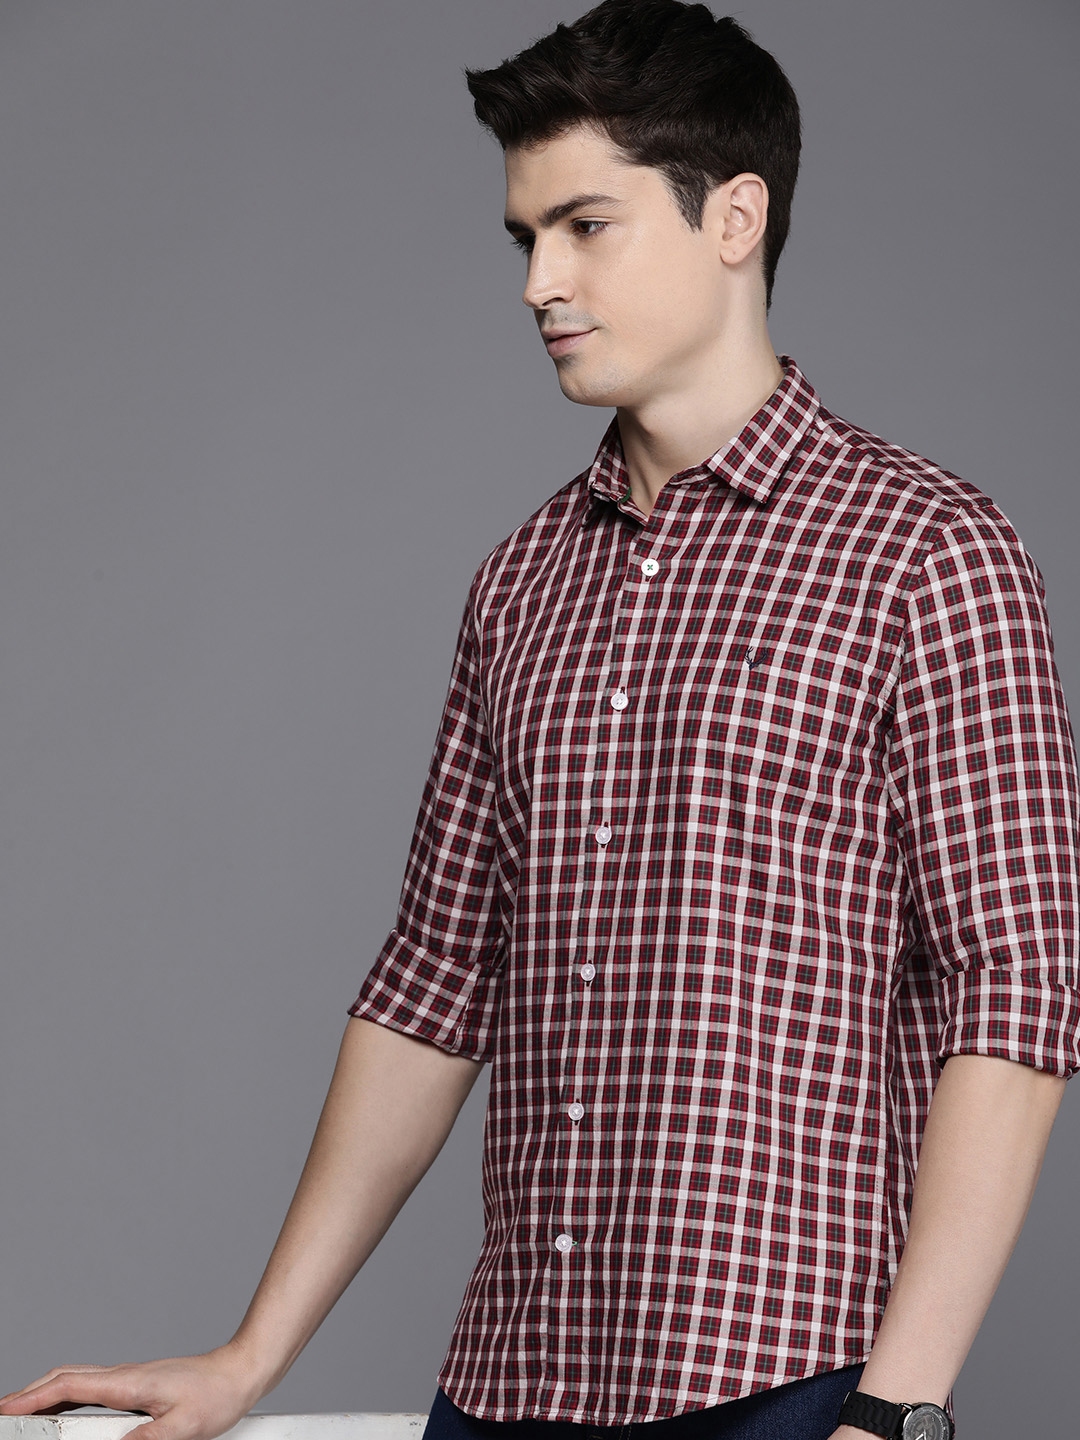 Allen Solly Checked Shirts - Buy Allen Solly Checked Shirts online in India